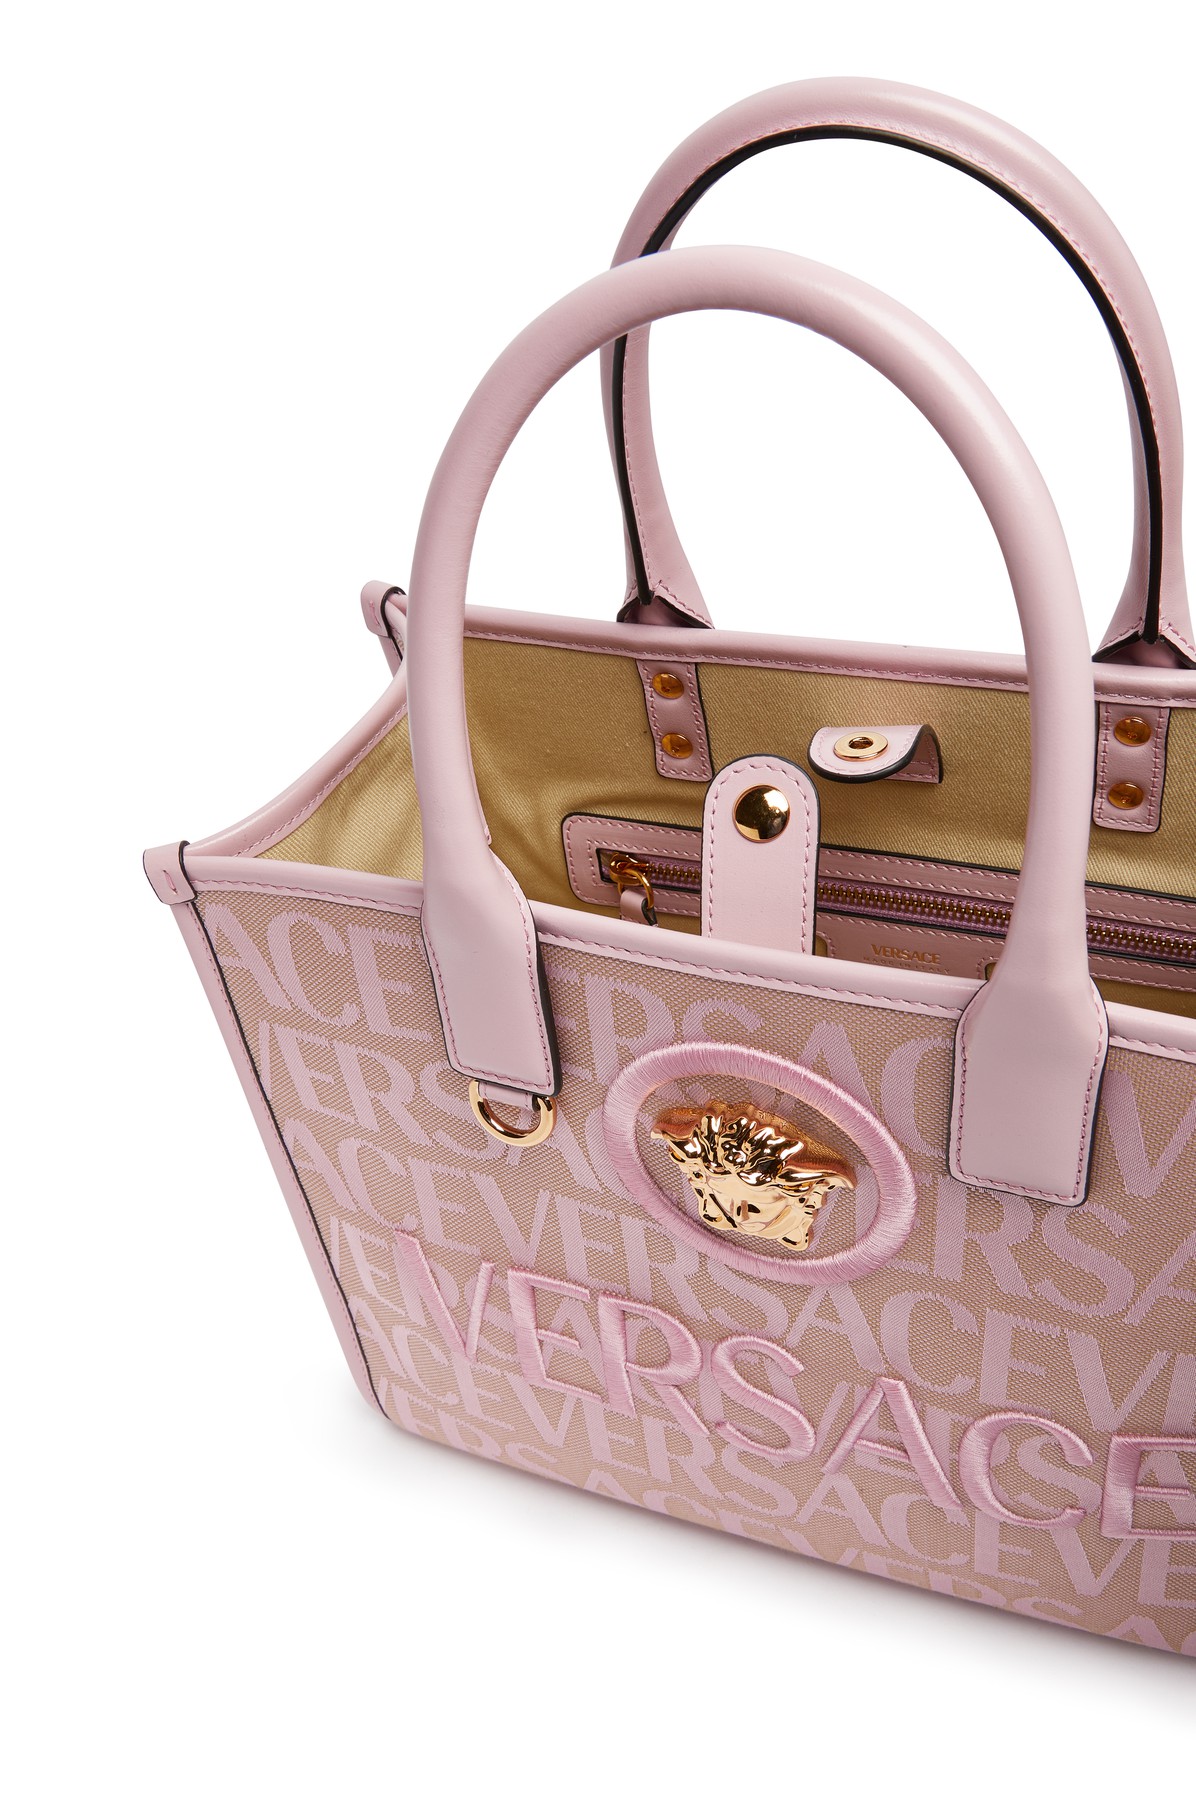 Women's Versace Allover Small Tote Bag by Versace